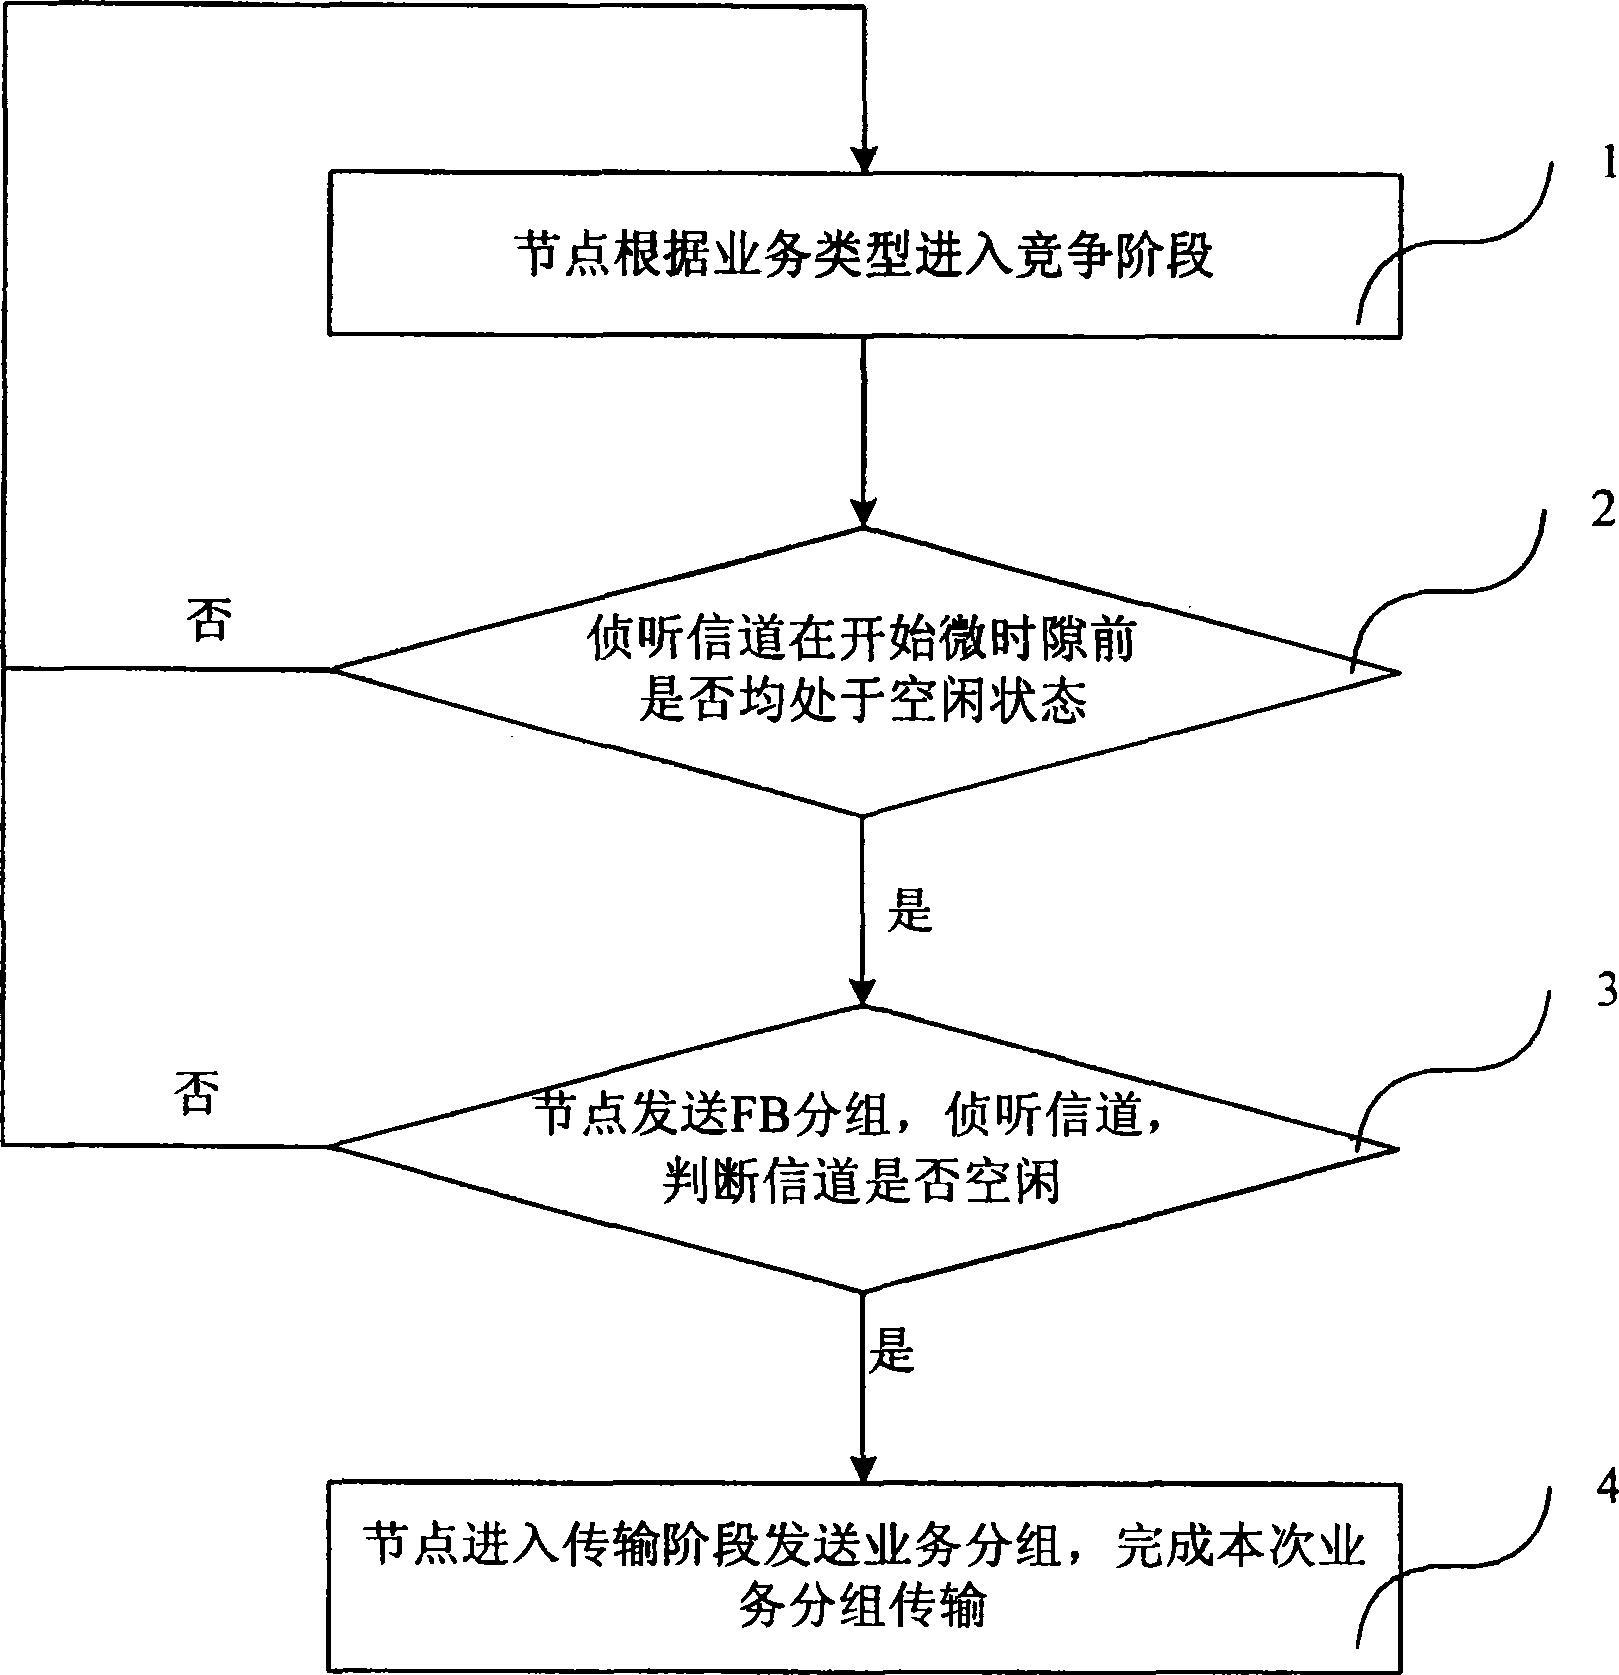 Multi-address access method for supporting service quality